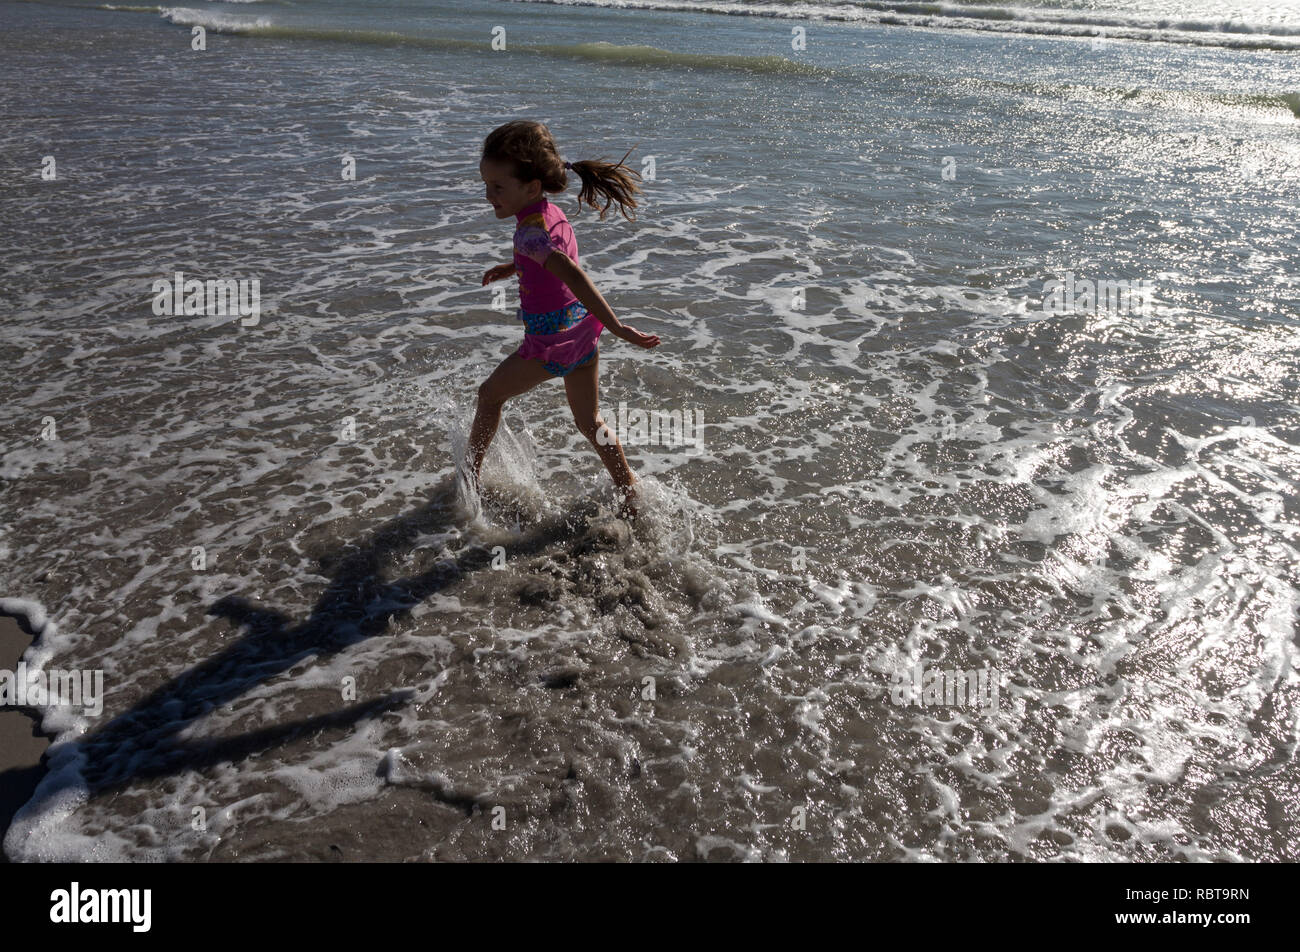 Young girl running in the shallow water on the beach in late afternoon sun Stock Photo